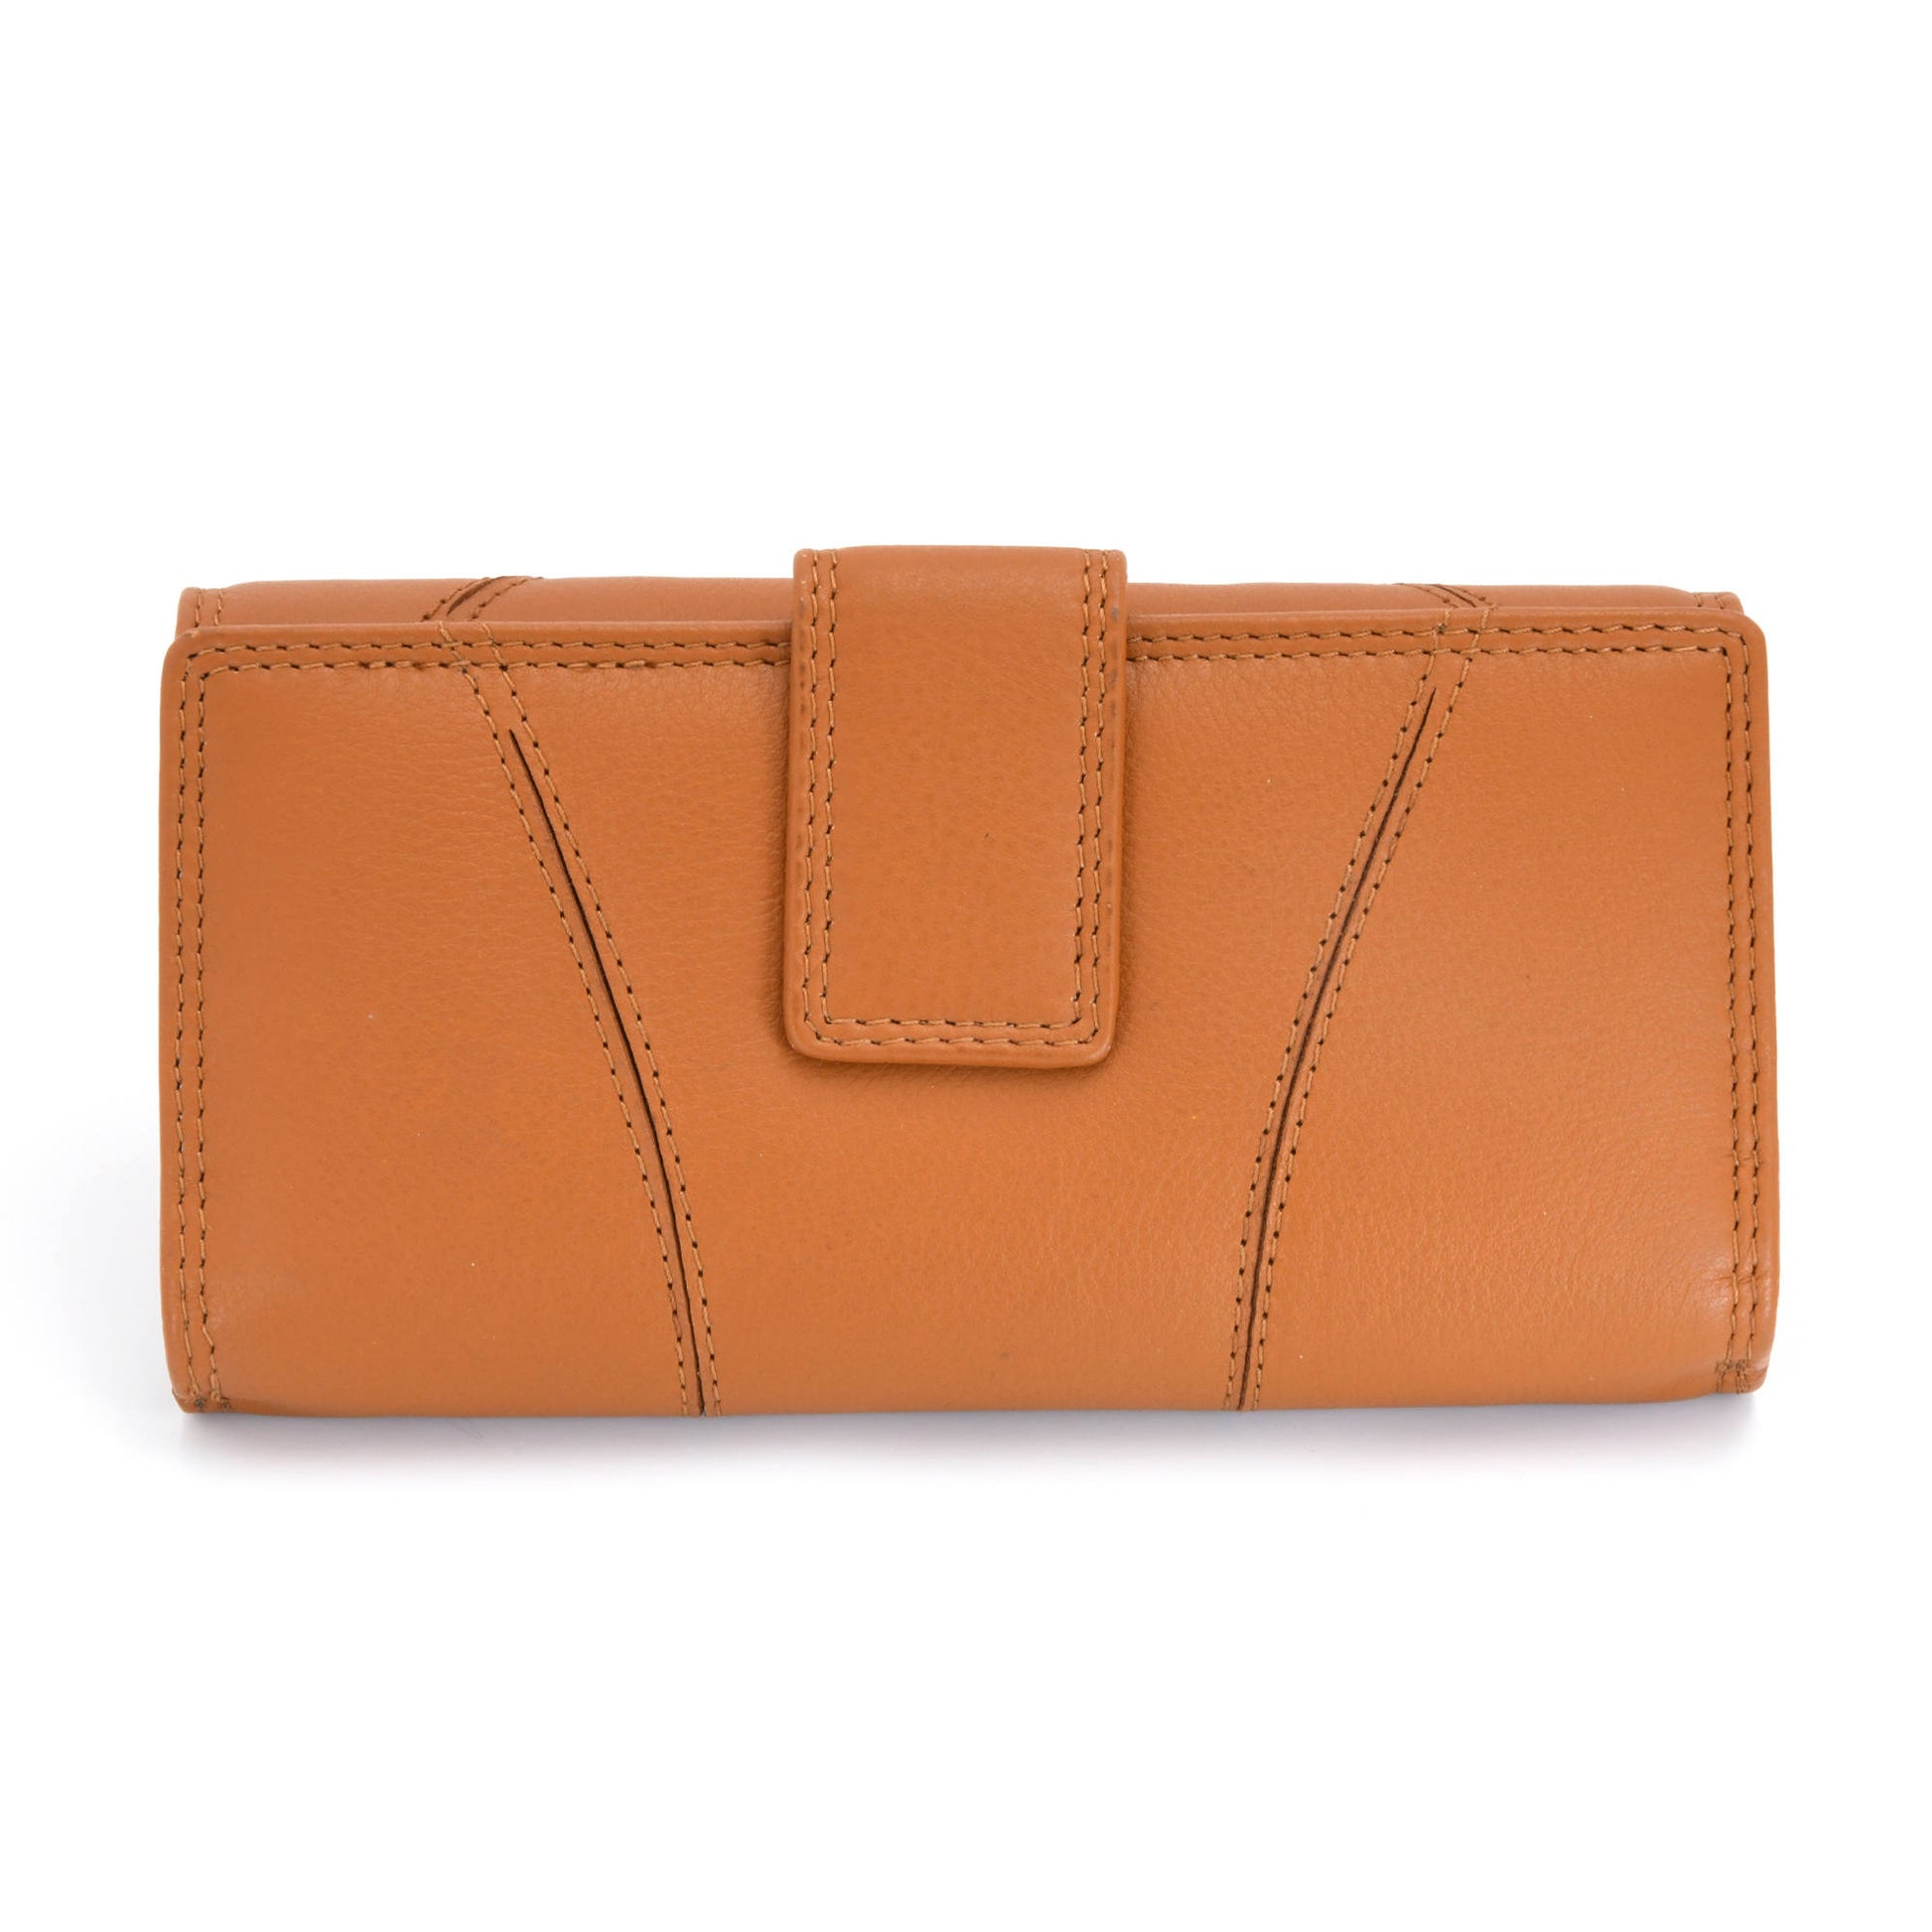 Style n Craft 300954-CG Clutch Wallet for Ladies in Cow Leather - Tan Color - Back Closed View